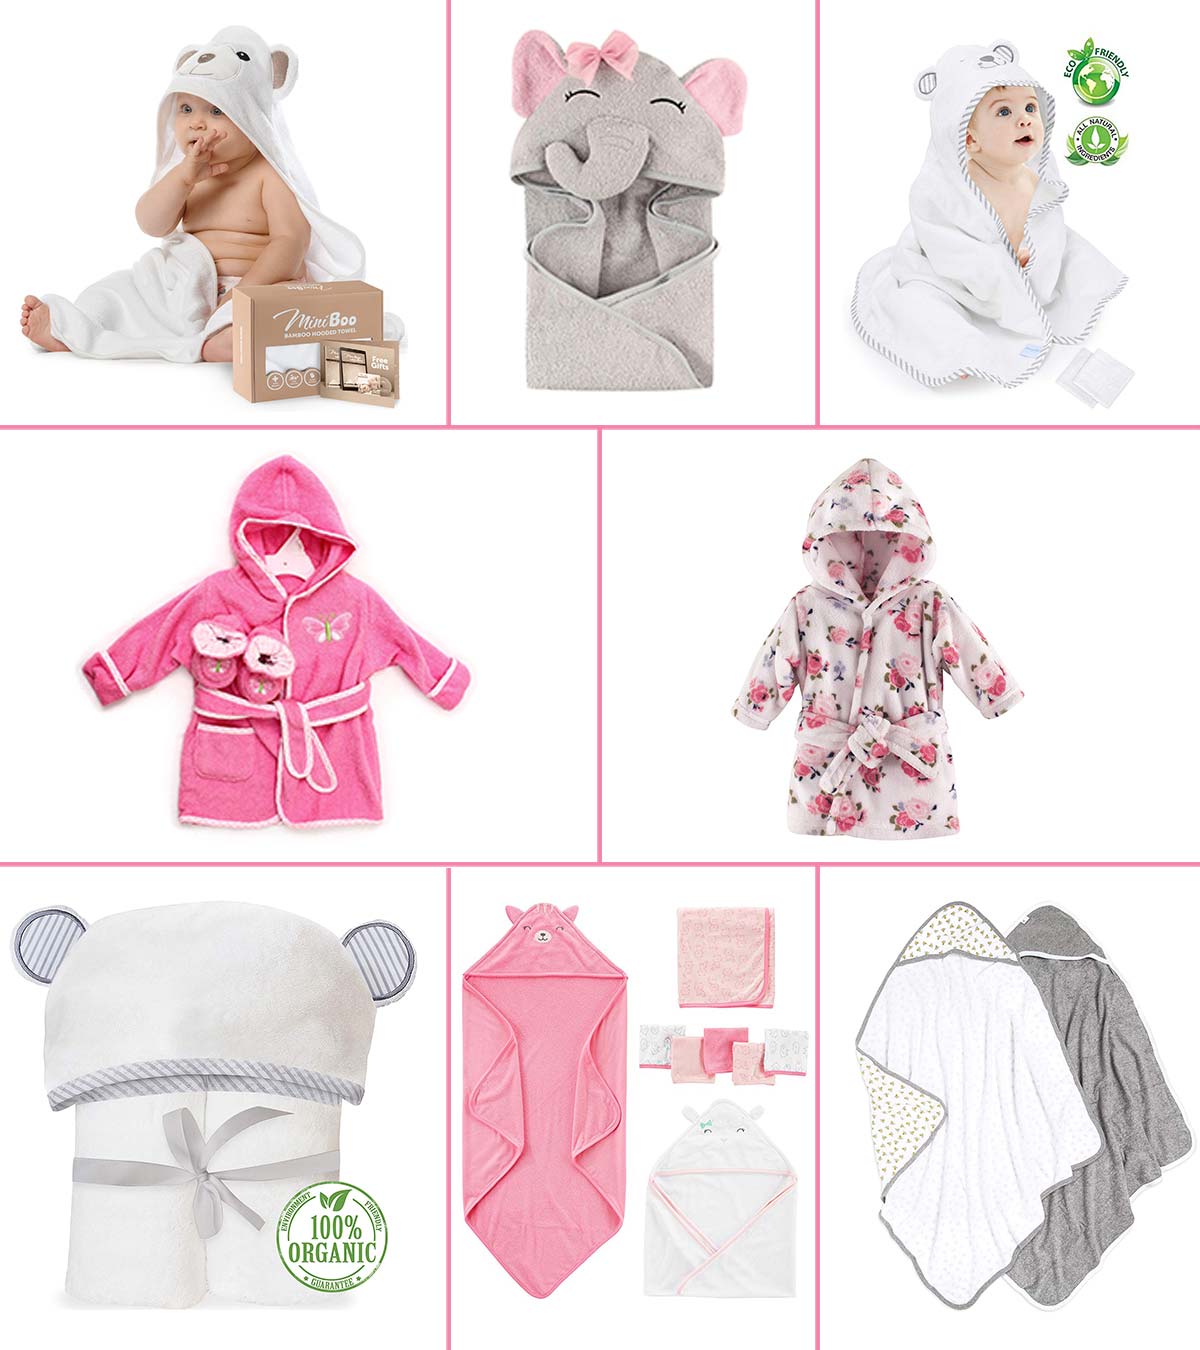 Kids Bath Towel Ultra Soft Hooded Towel Highly Absorbent Bathrobe Blanket Toddlers Shower Gifts for Boys Girls-Extra Large 28 x 55 KAQI 